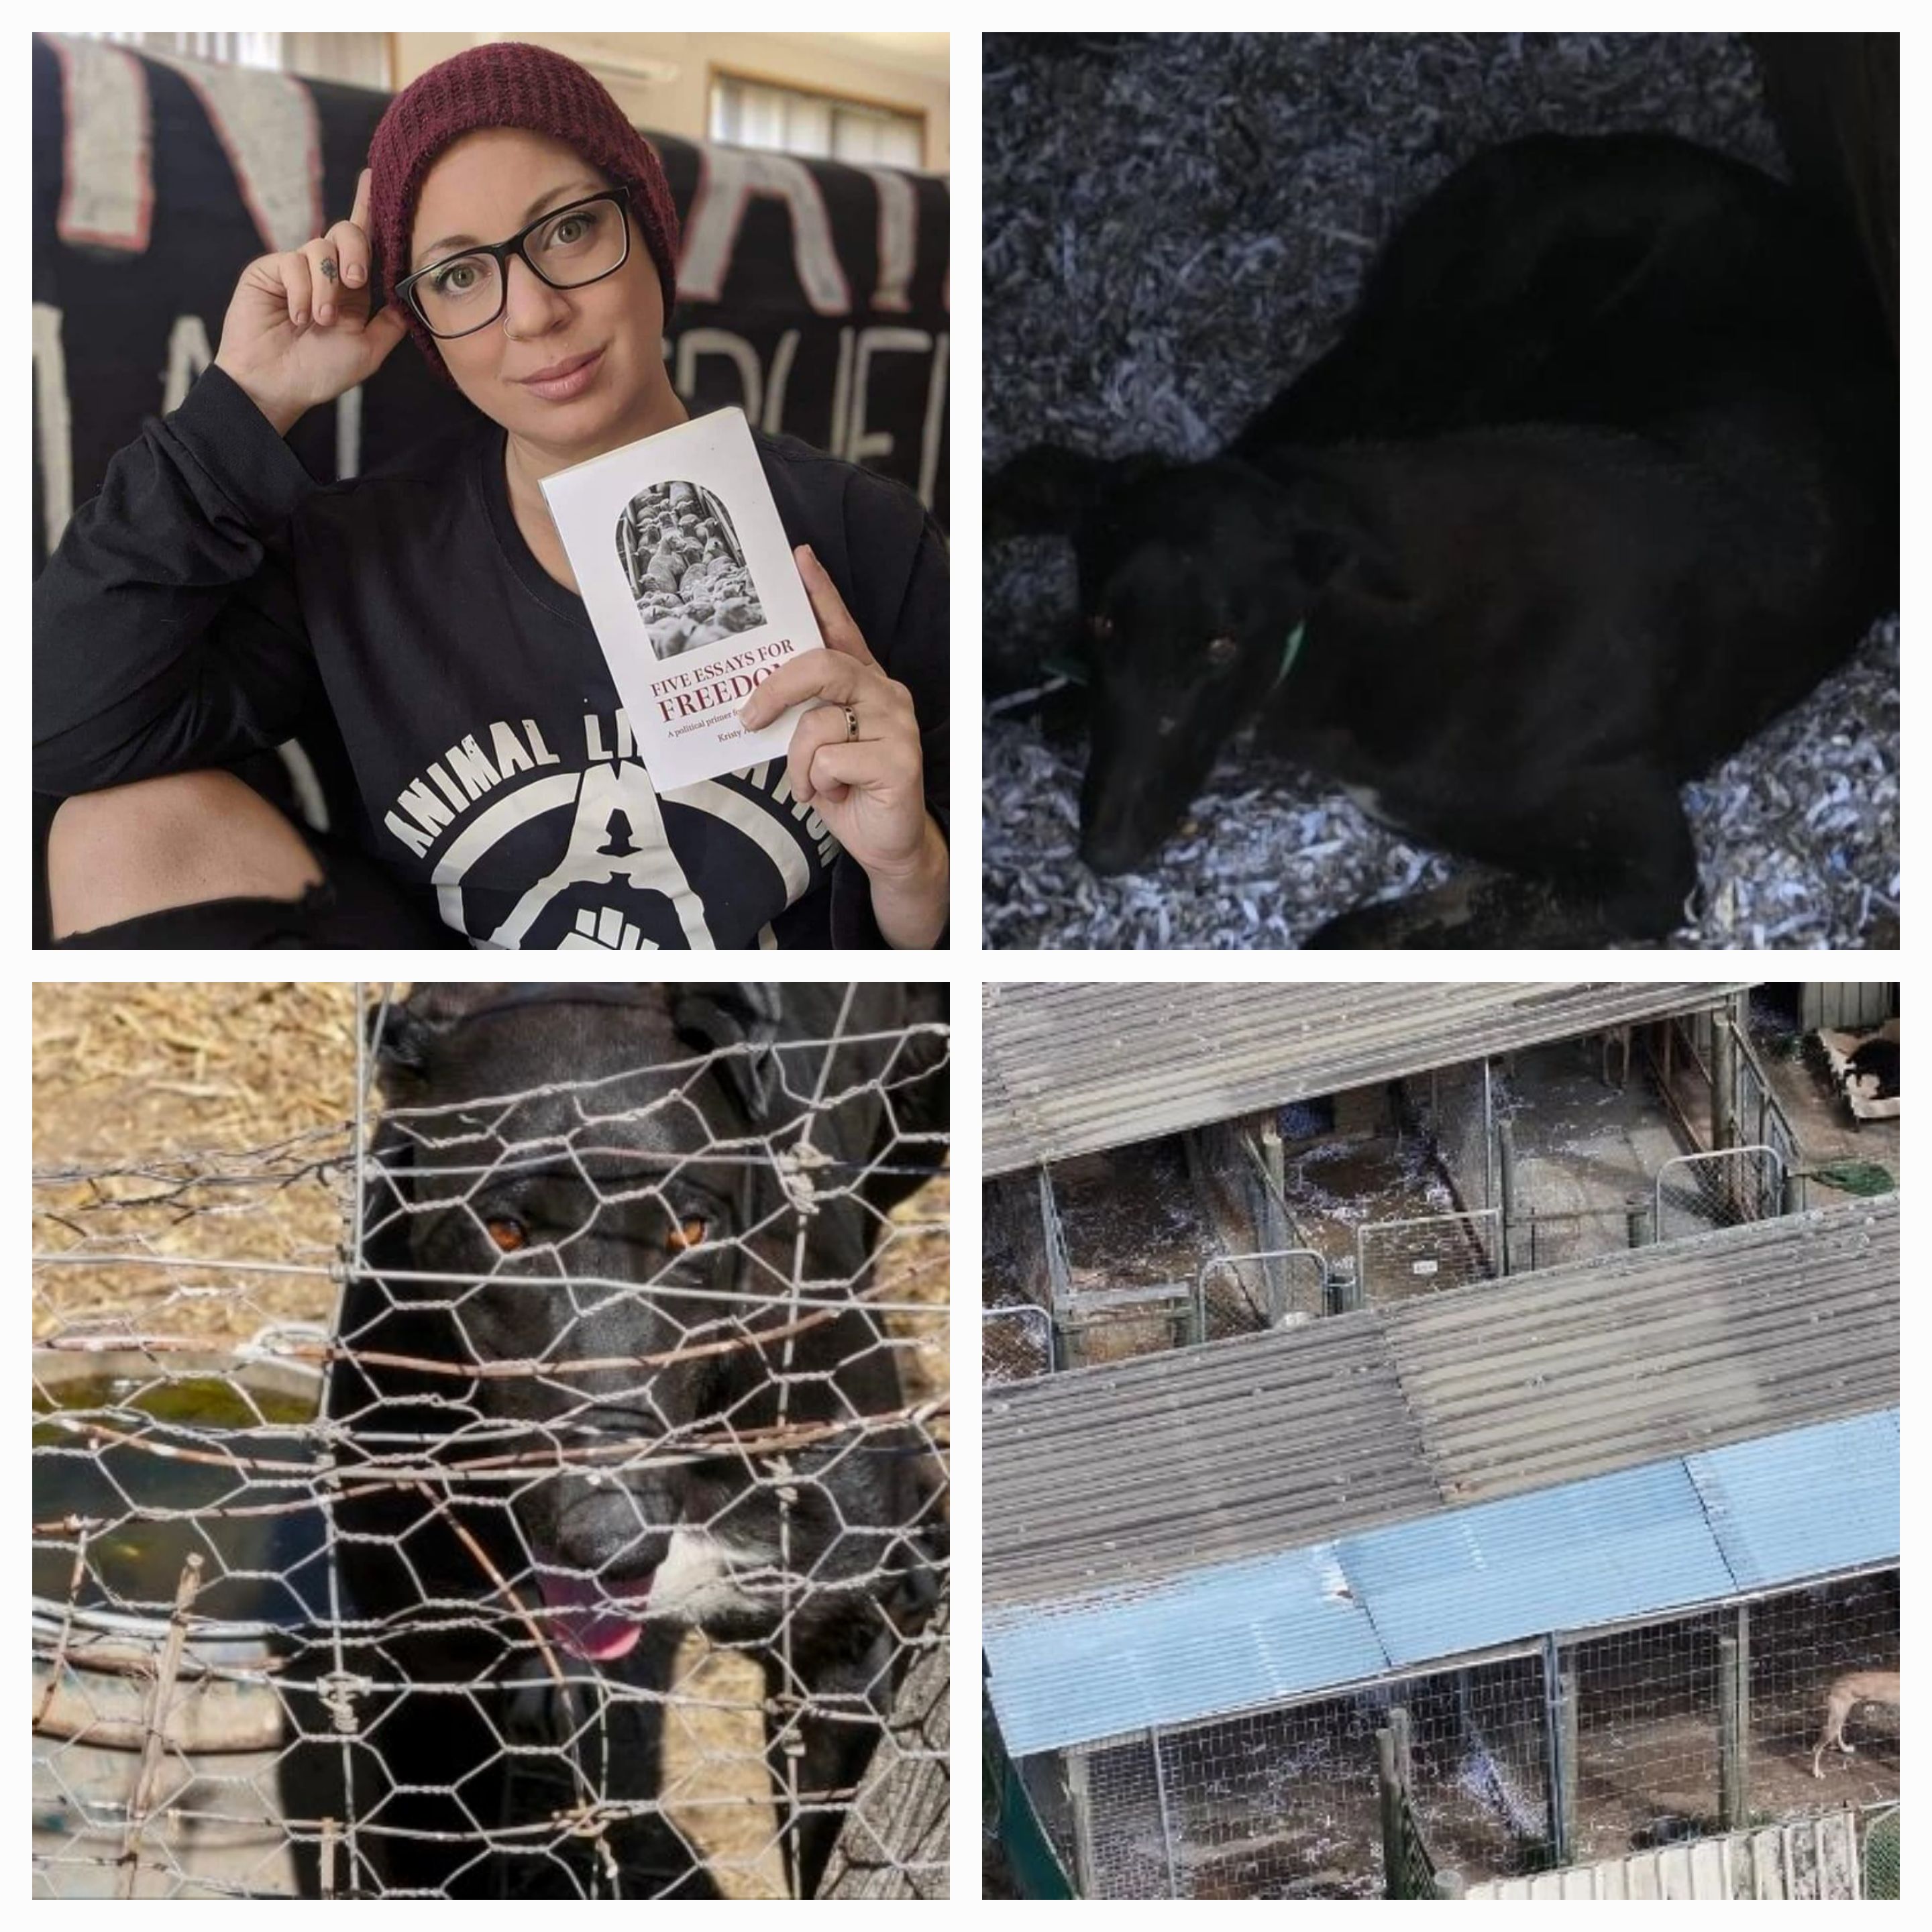 Photos provided by Animal Liberation Tasmania of Kristy Alger and the Defund TasRacing campaign